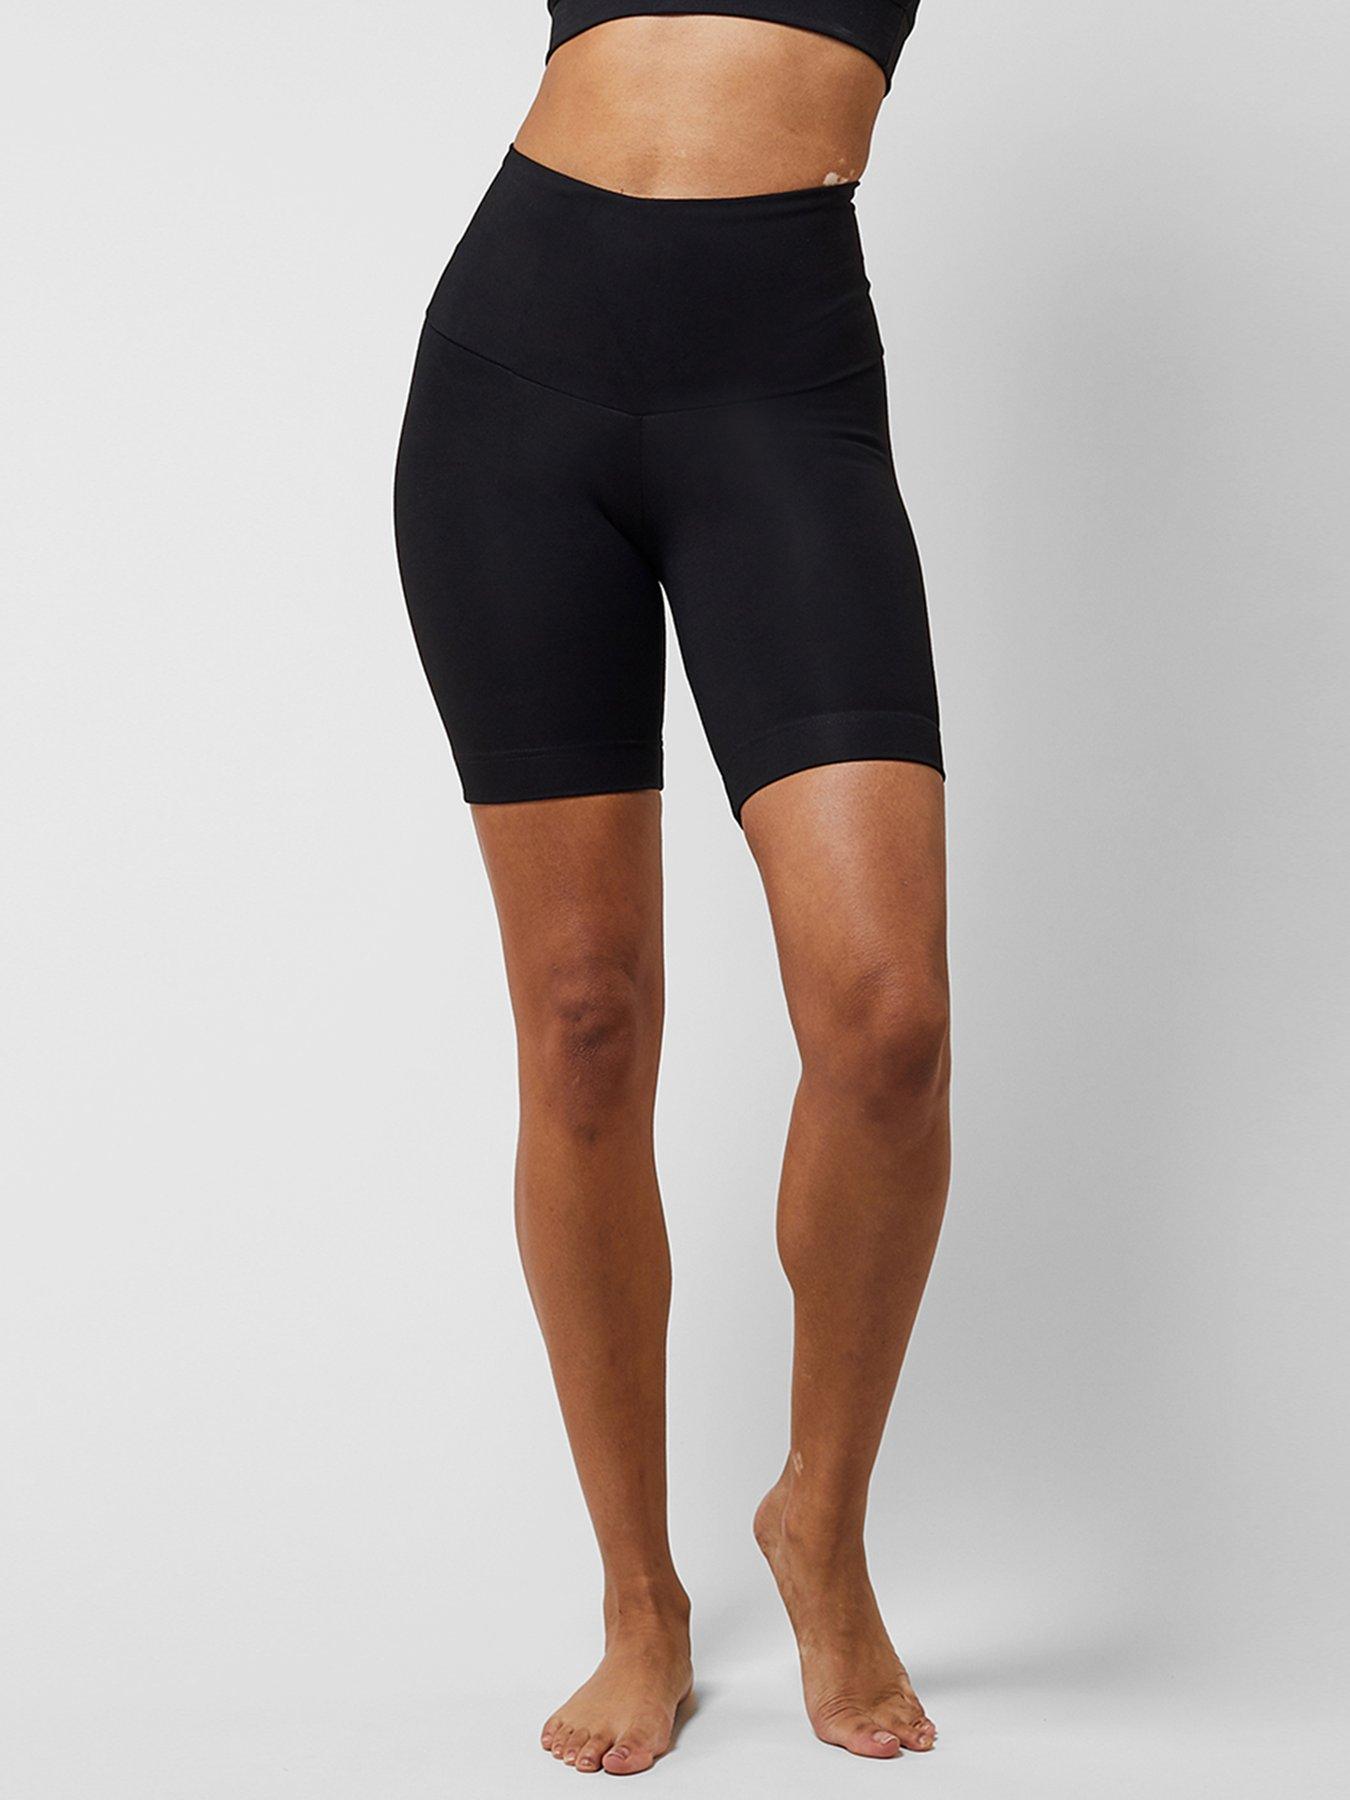 TLC Sport Performance Tummy Control Extra Strong Compression Full